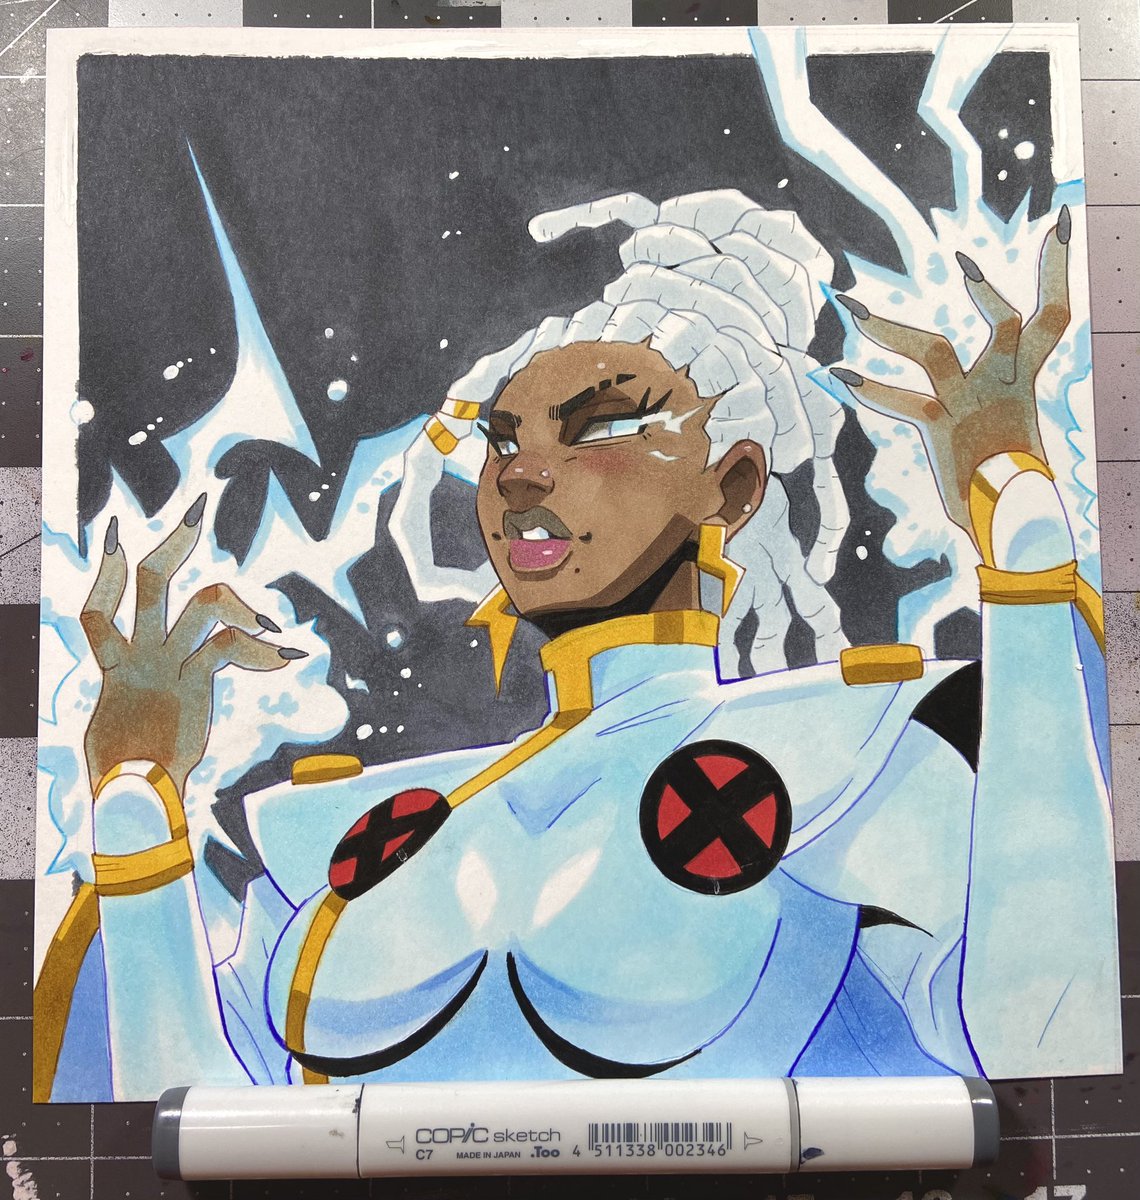 Okay we continue with Storm!